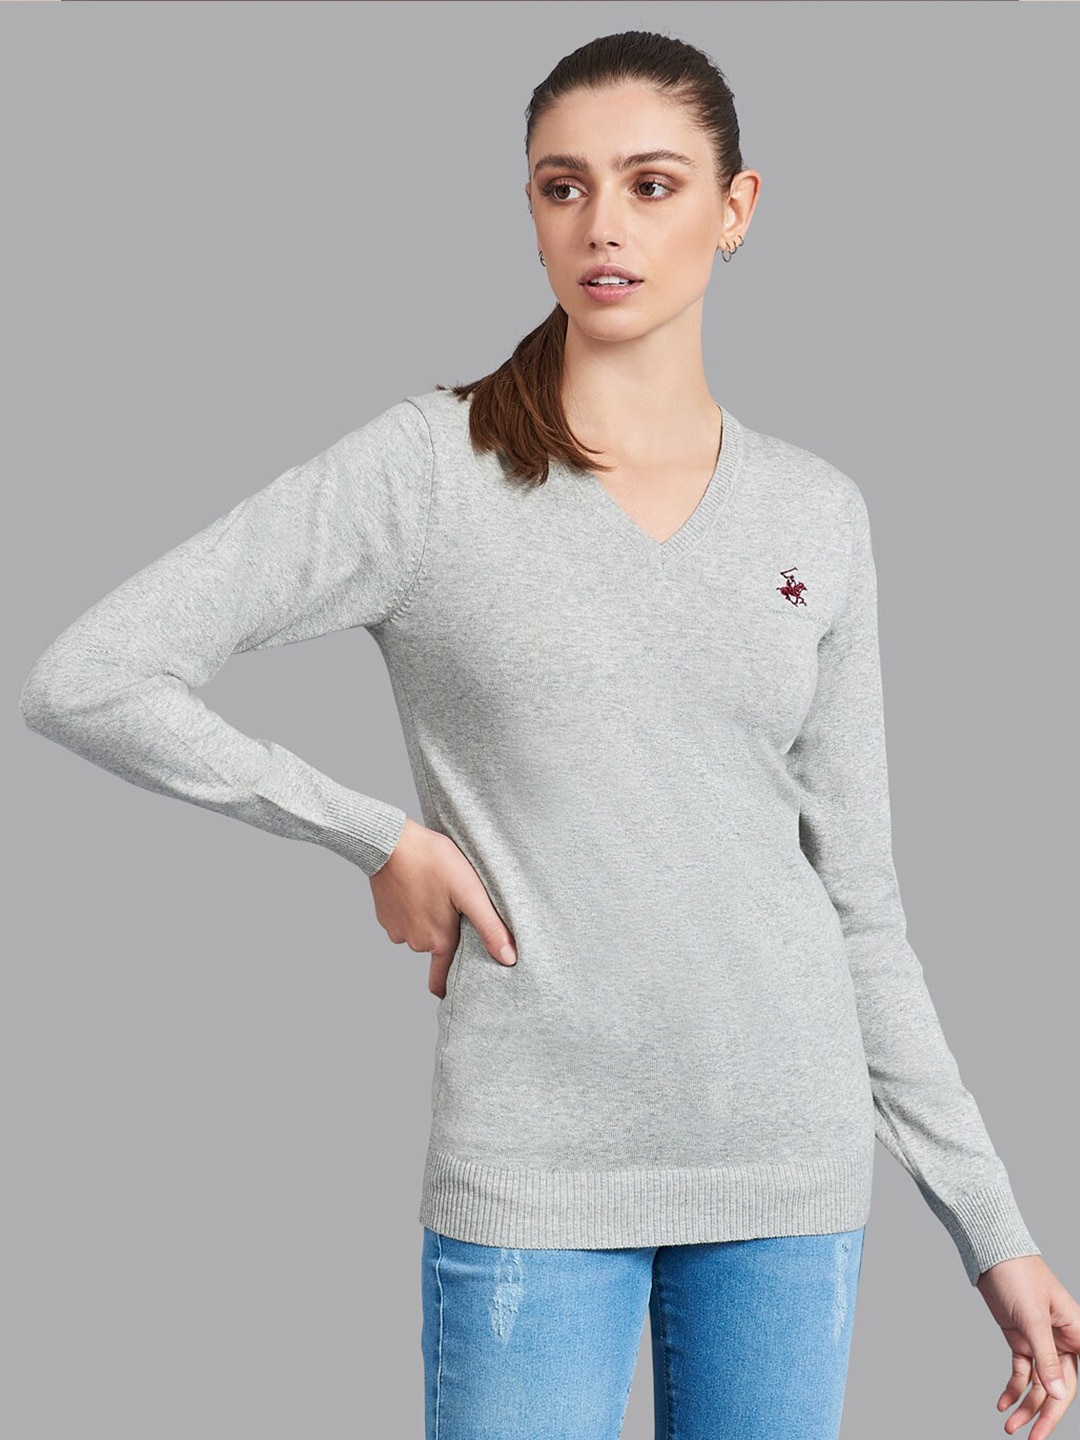 Beverly Hills Polo Club Woman Grey Polo Club Pullover Price in India